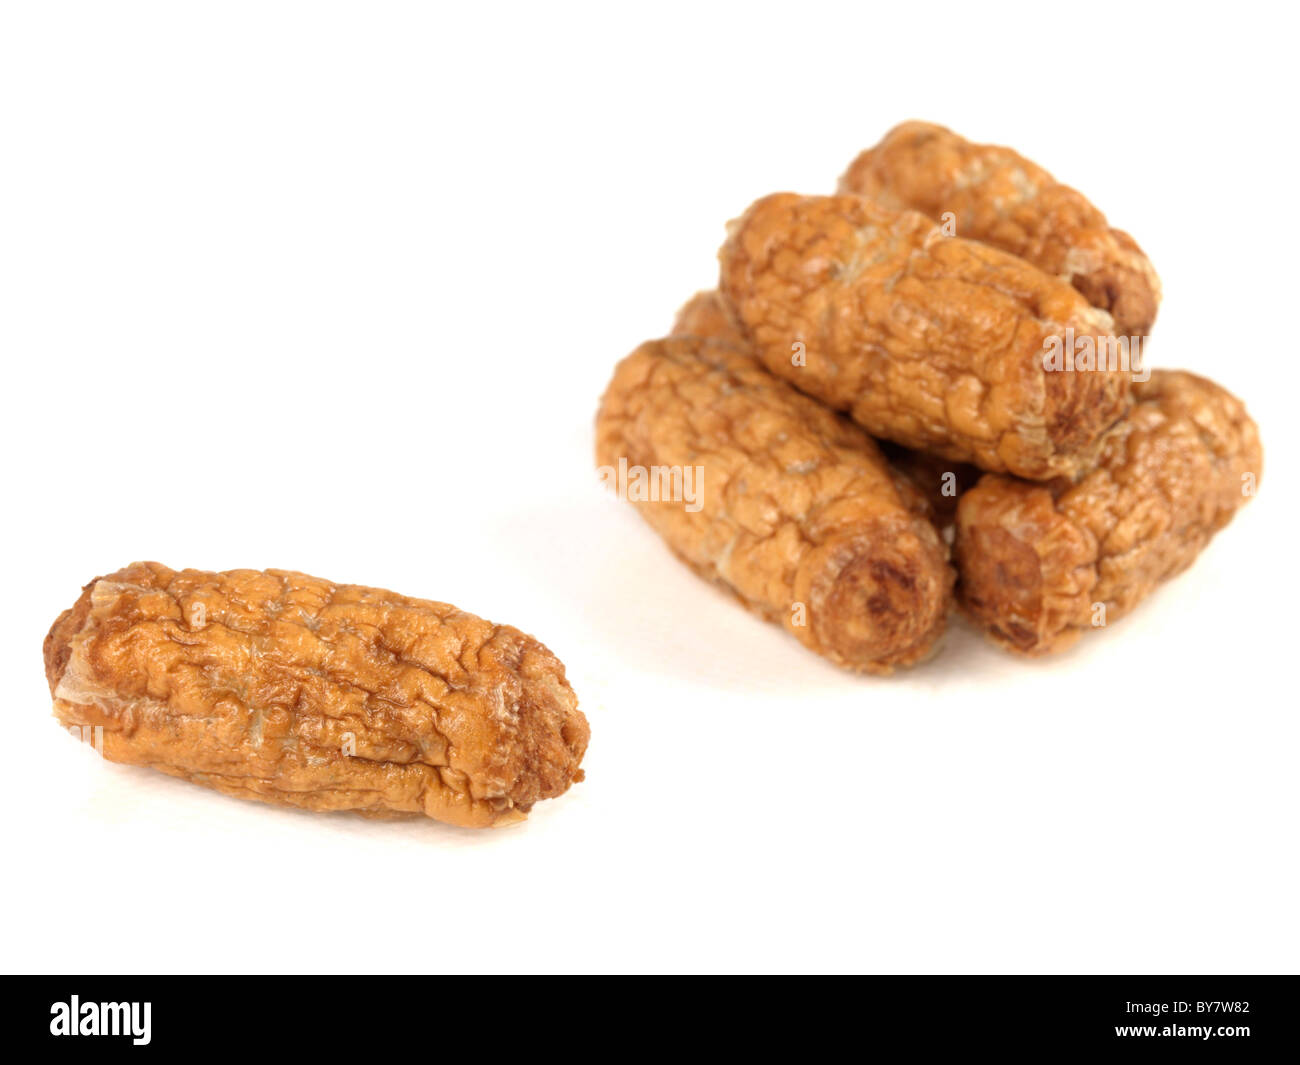 Fresh Party Food Small Pork Cocktail Sausages Finger Food Or Snacks Isolated Against A White Background With A Clipping Path And No People Stock Photo